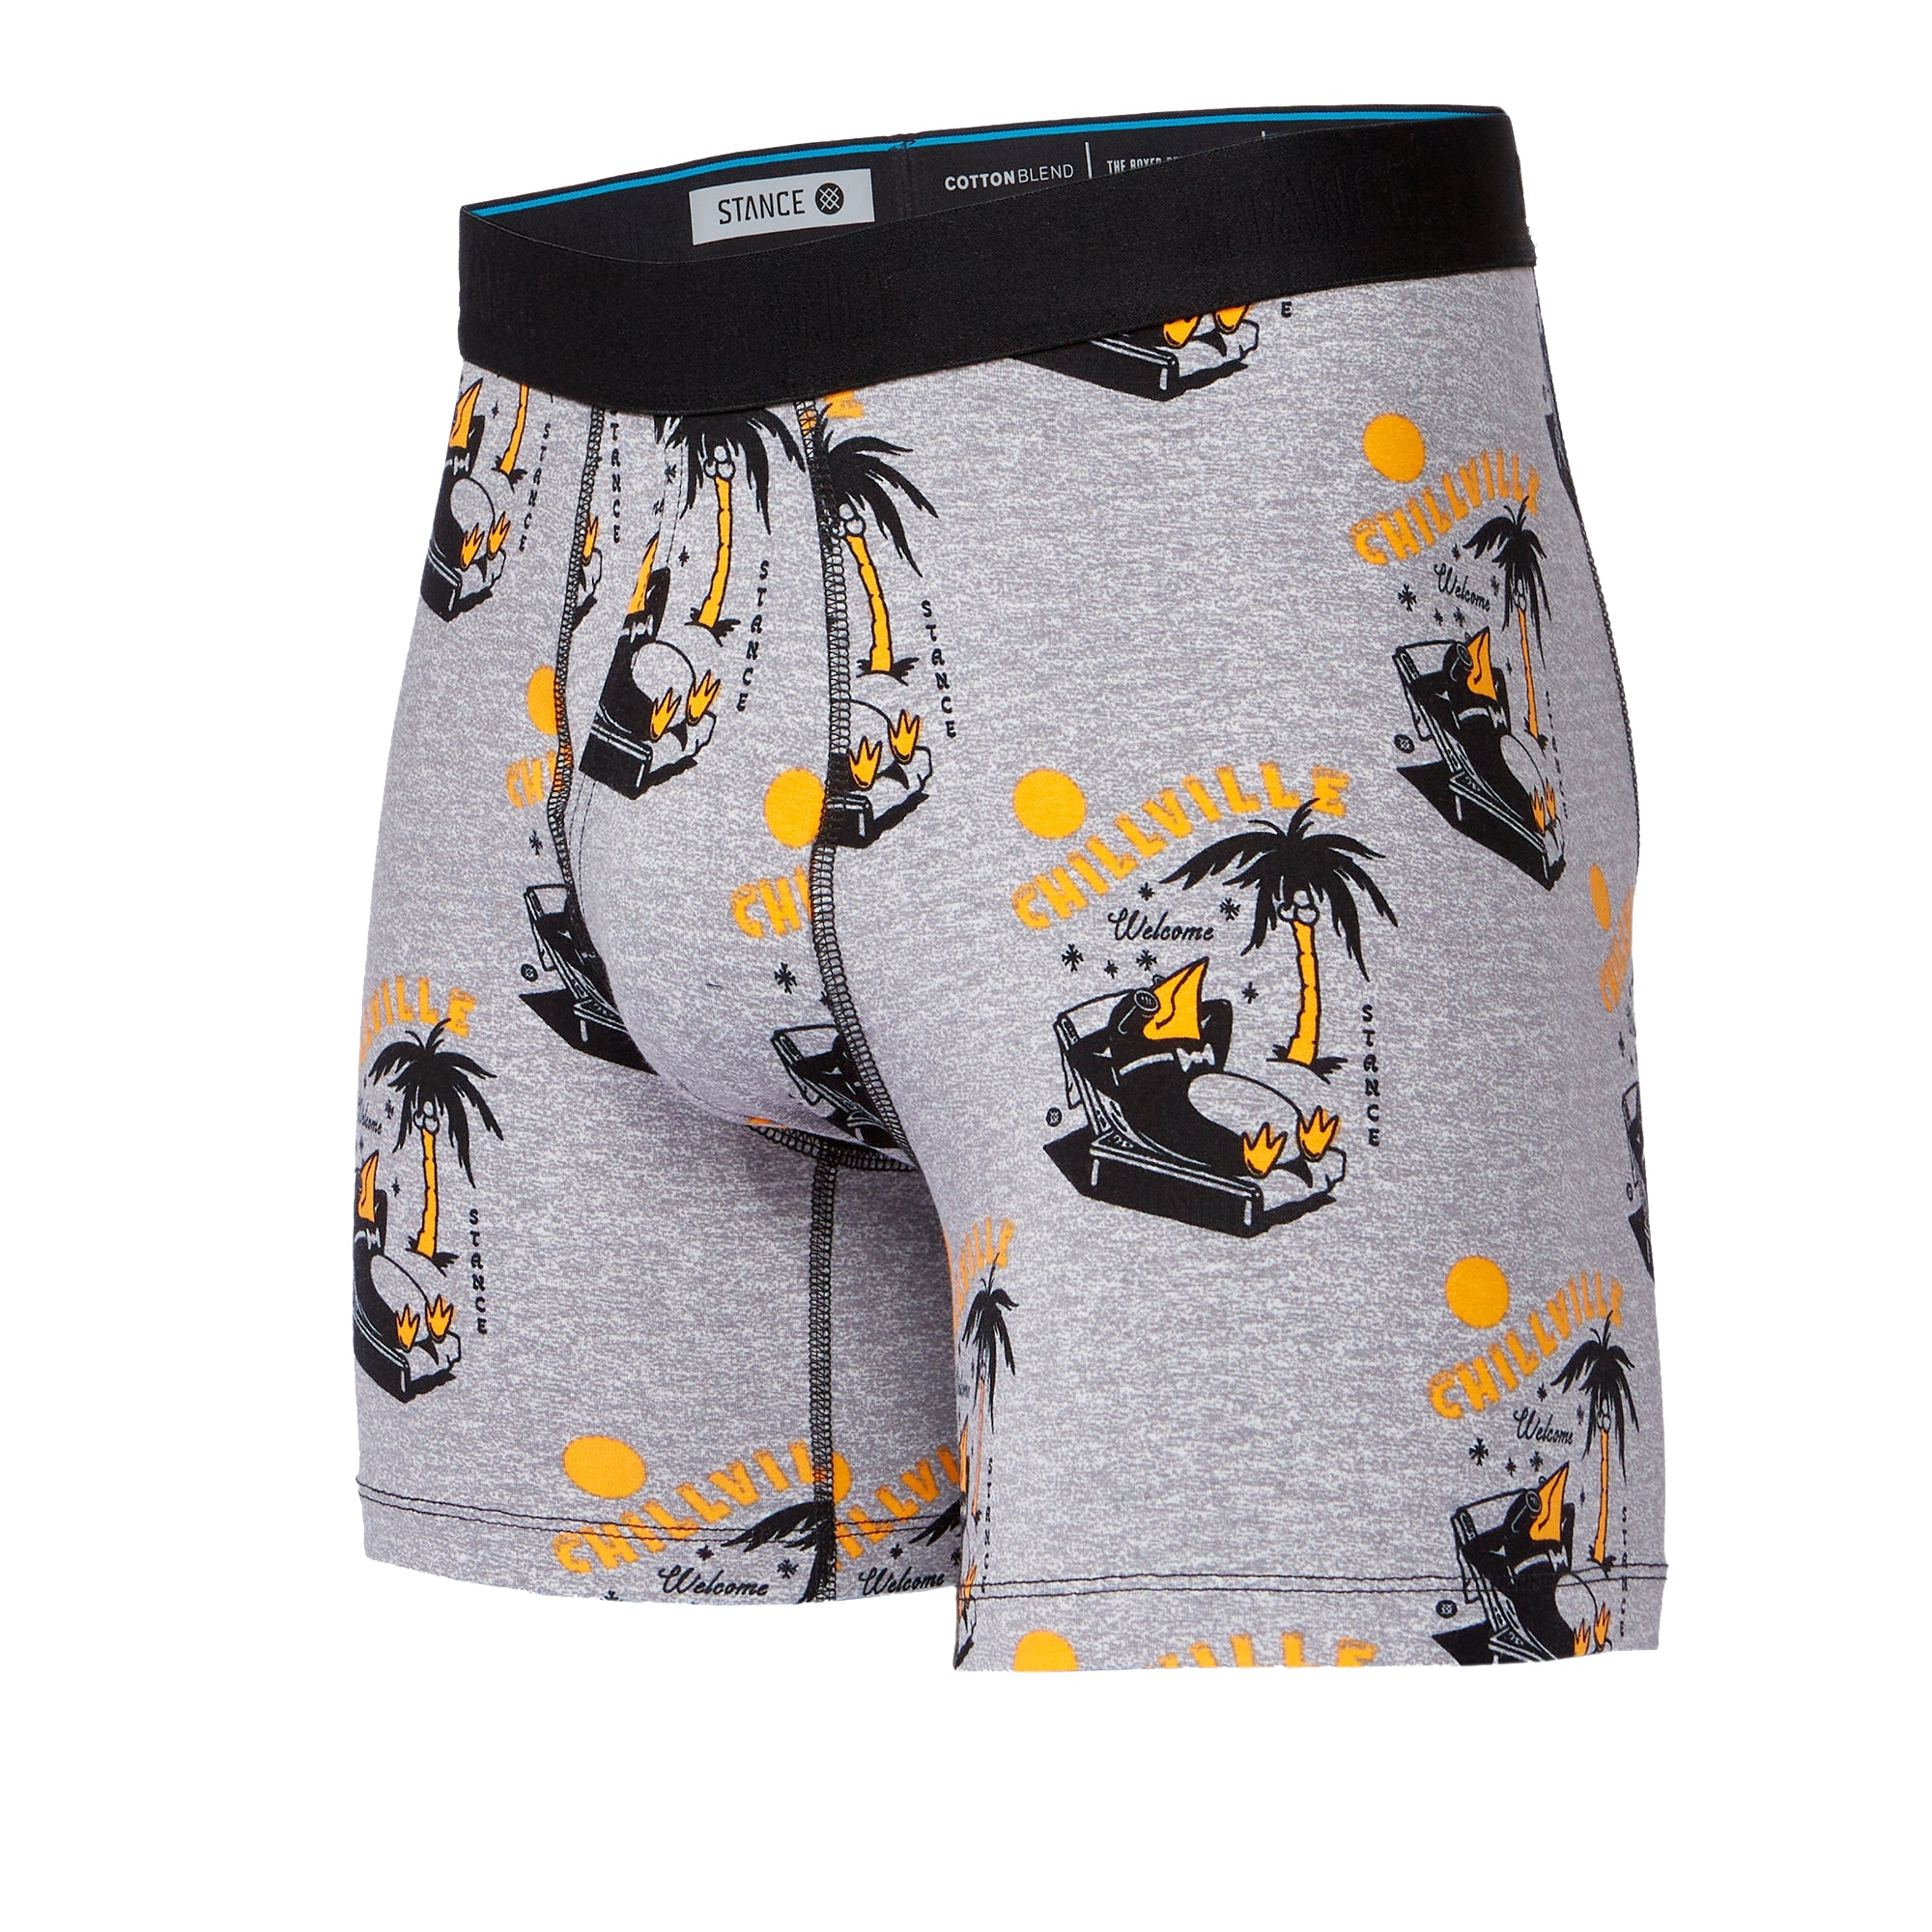 Stance Chillville Boxer Brief GRY S